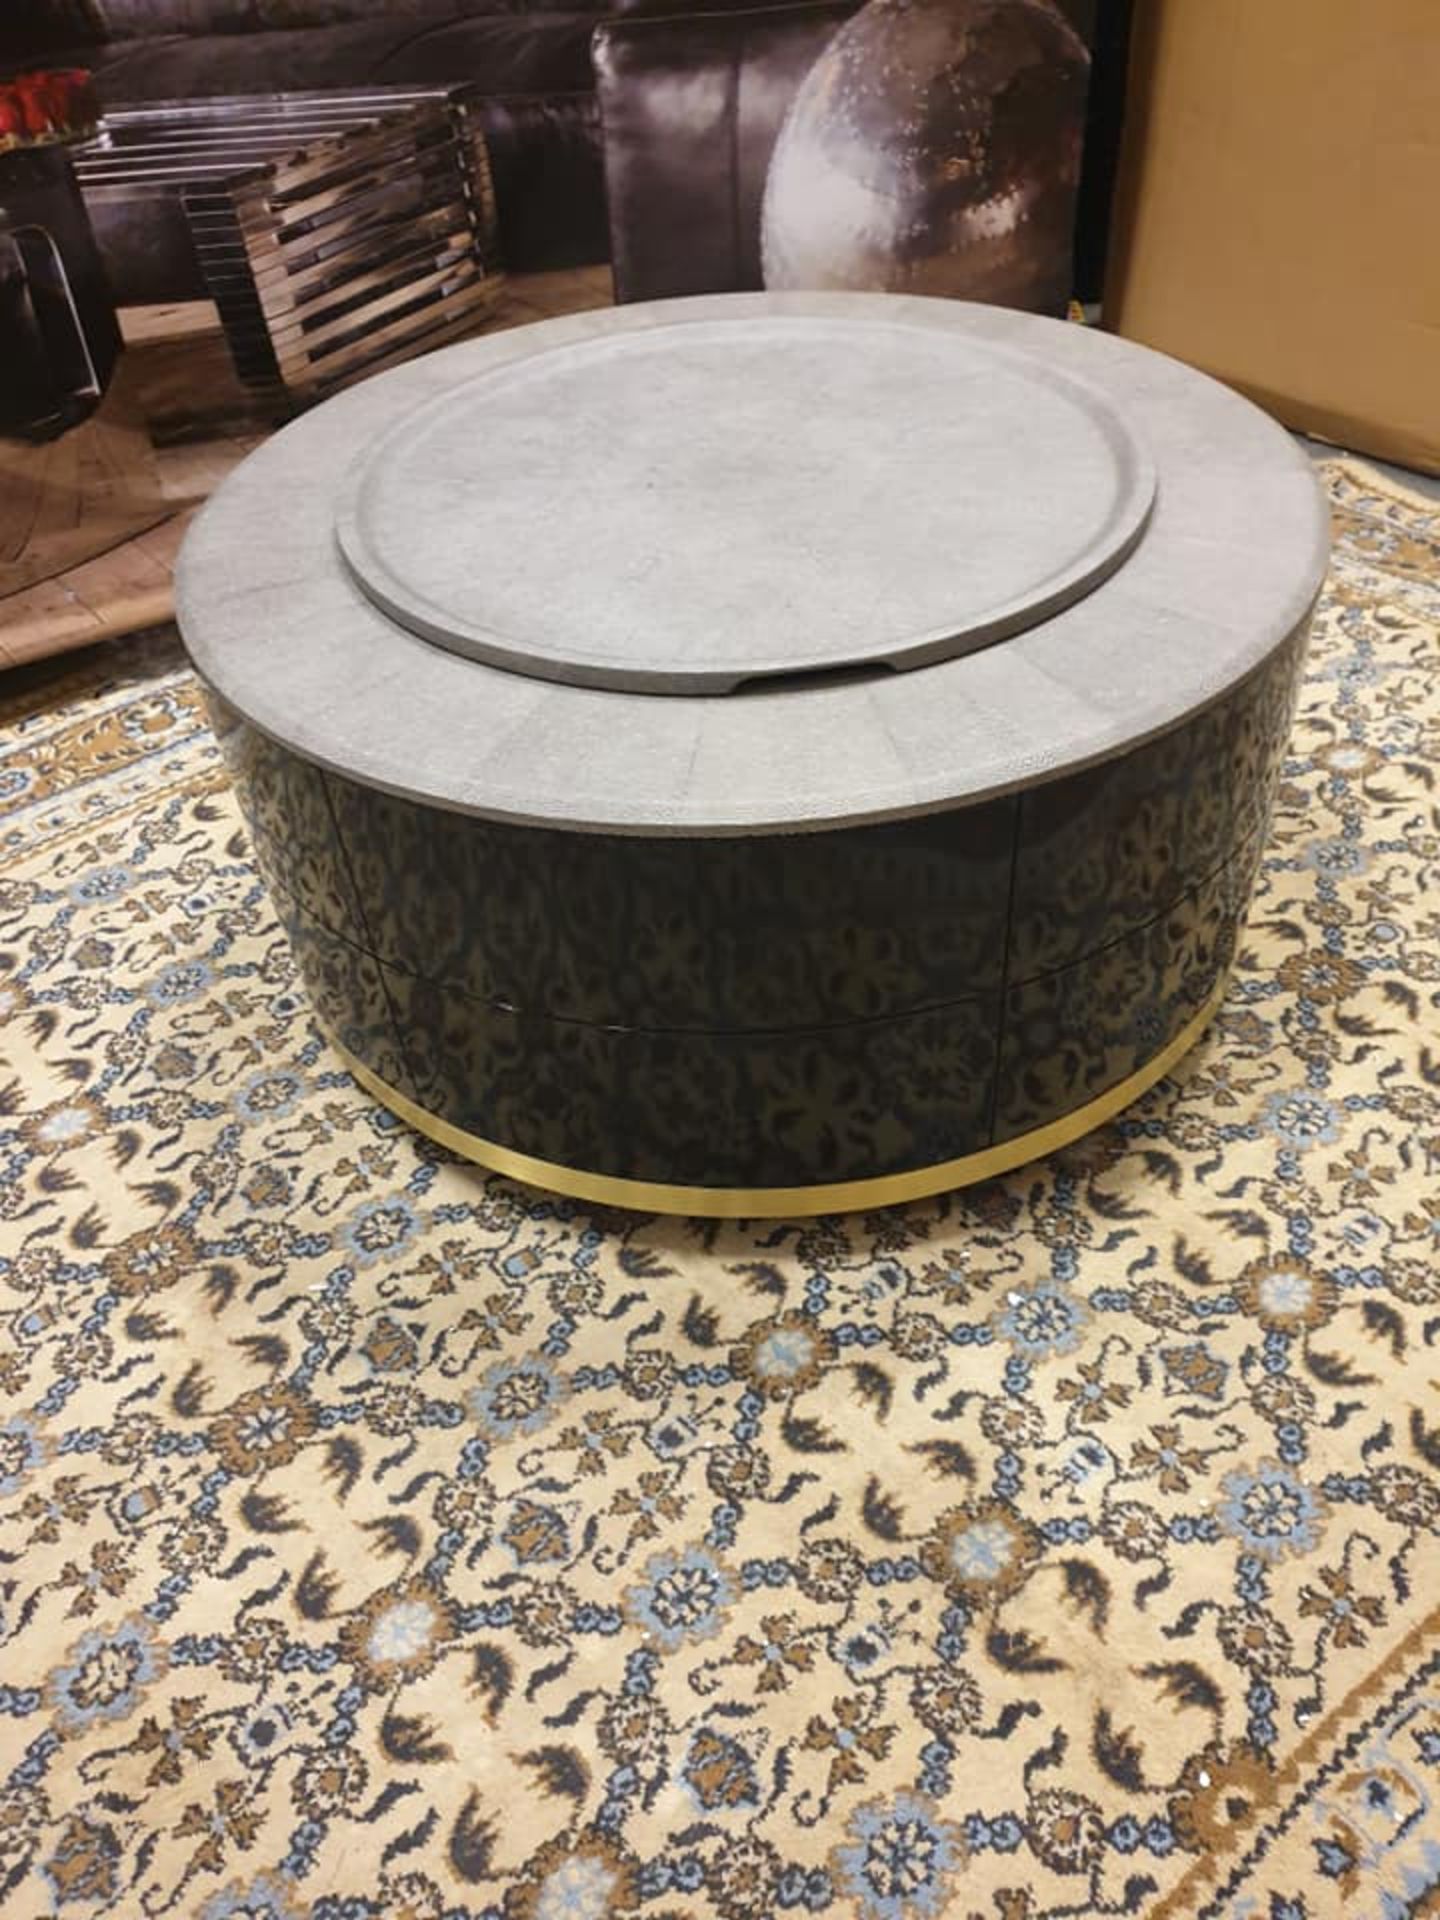 Ashkelly Drum Coffee Table Grey Shagreen Wrapped With Gloss Panel Detailing Brass Banding And